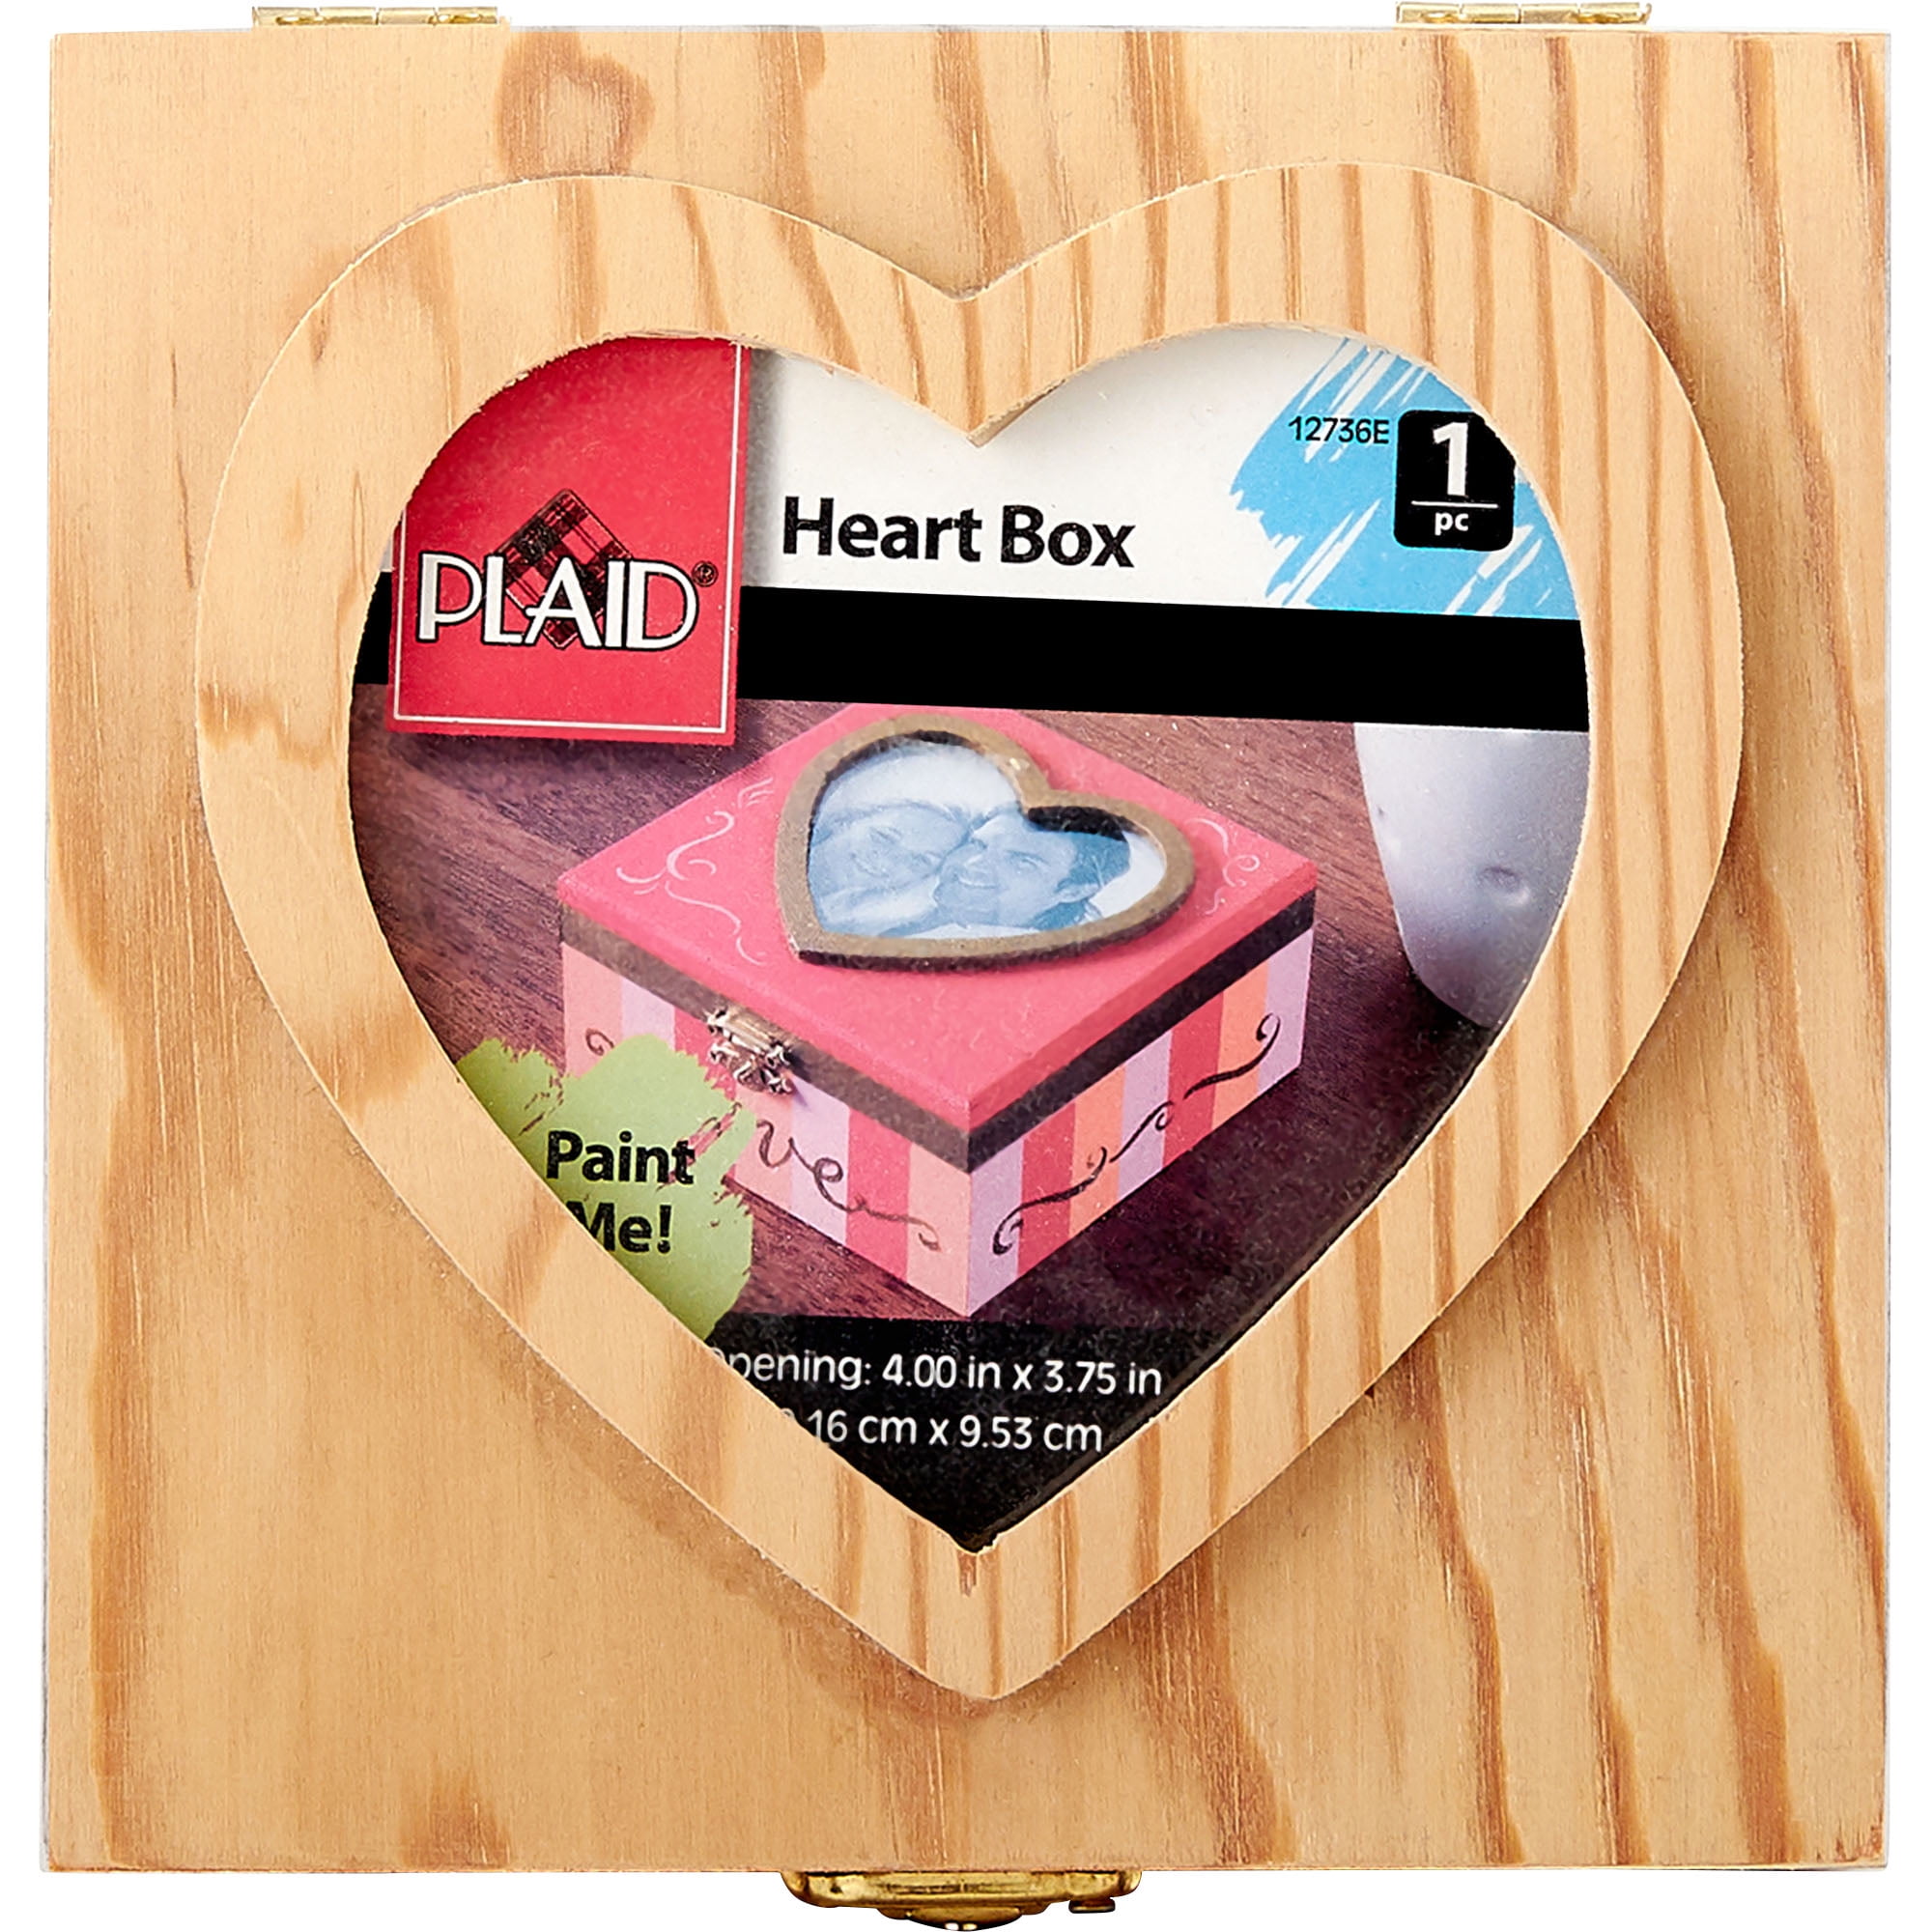 Plaid Unpainted Wood Surface, Wood Hinged Box with Heart Lid, 1 Piece, 5.25" x 2.5" x 5.25"